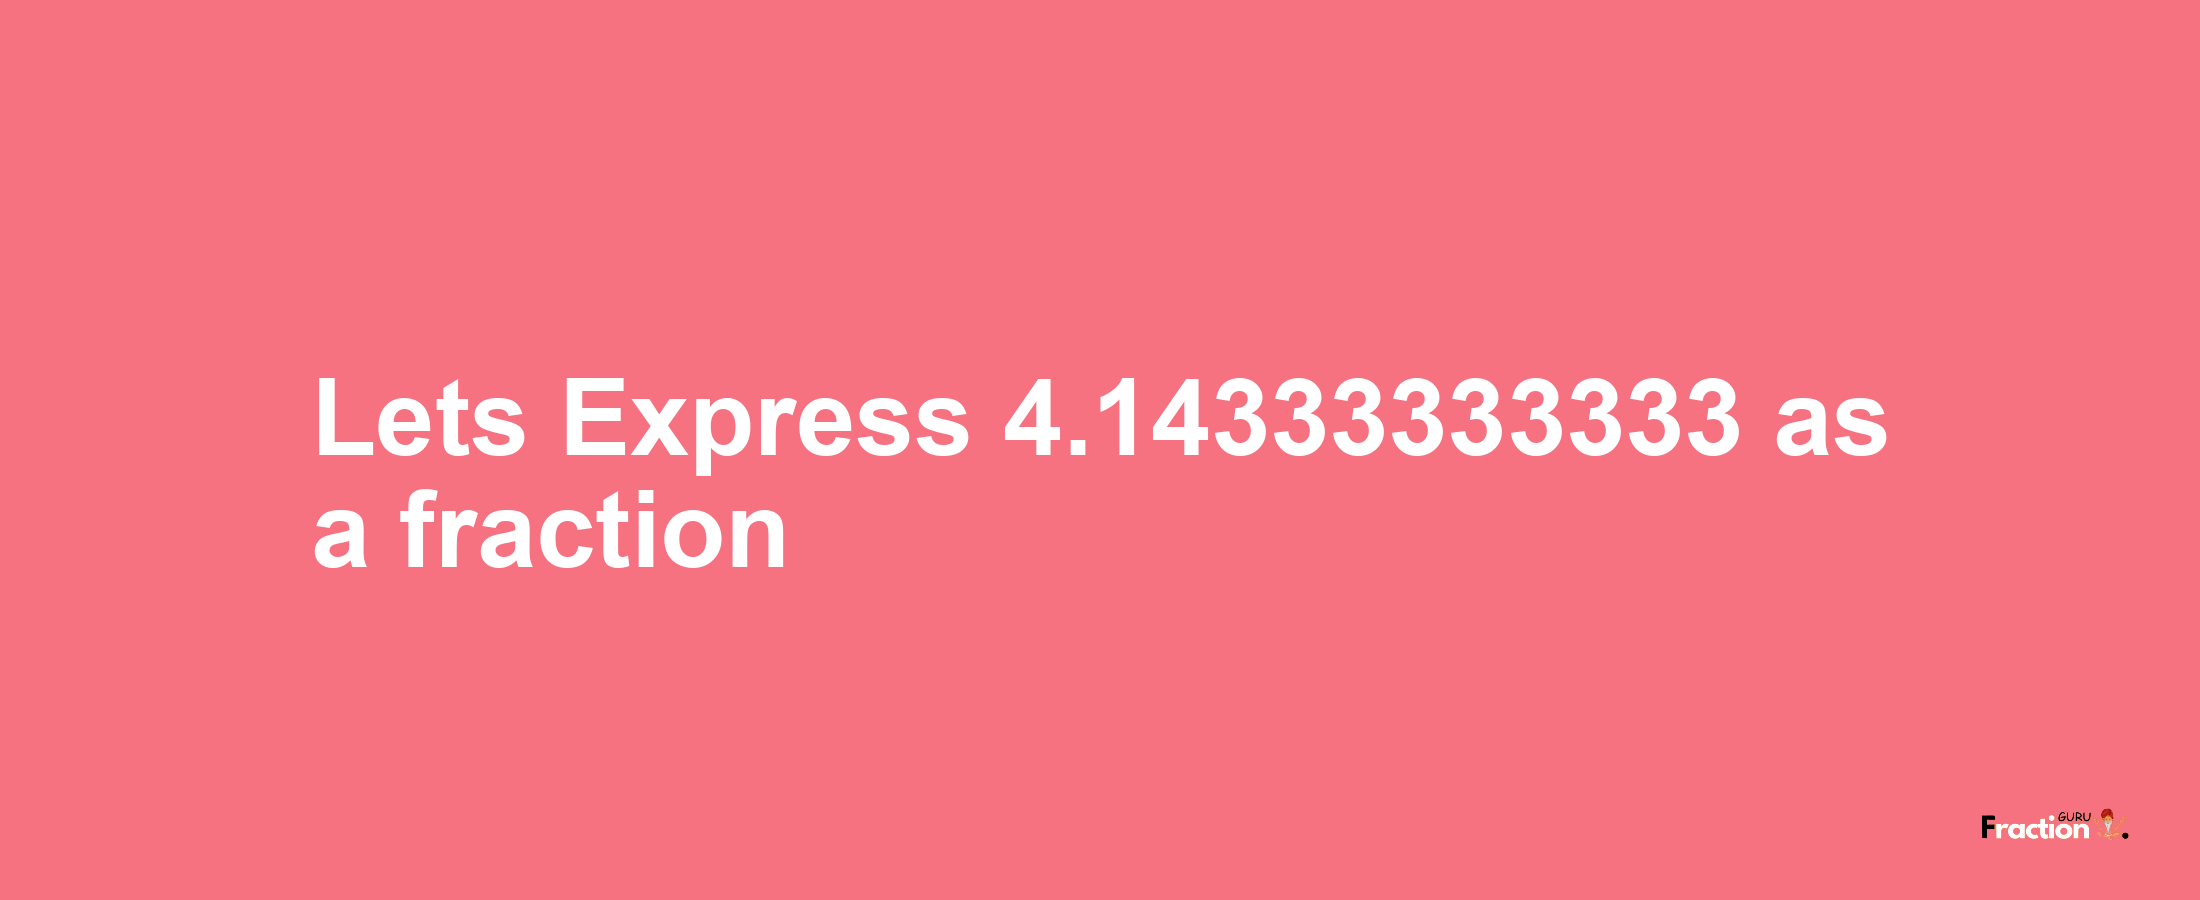 Lets Express 4.14333333333 as afraction